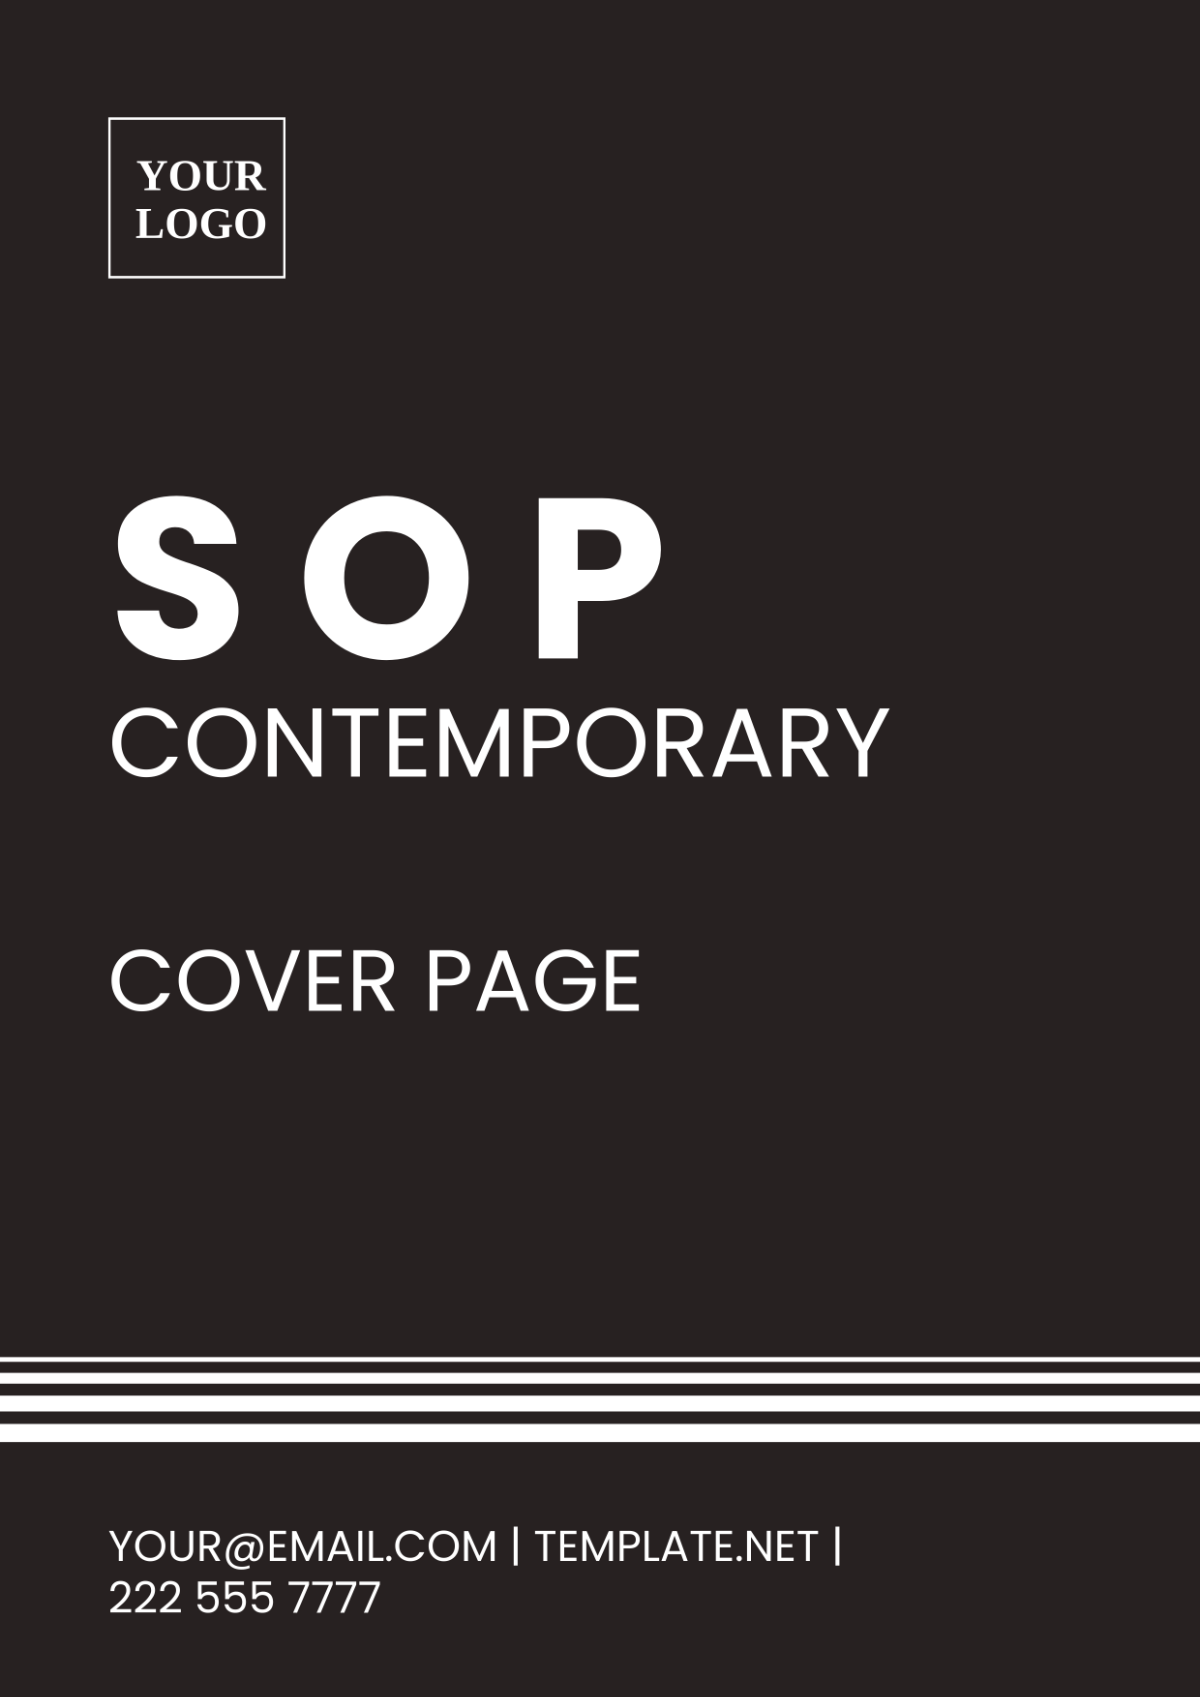 SOP Contemporary Cover Page Template